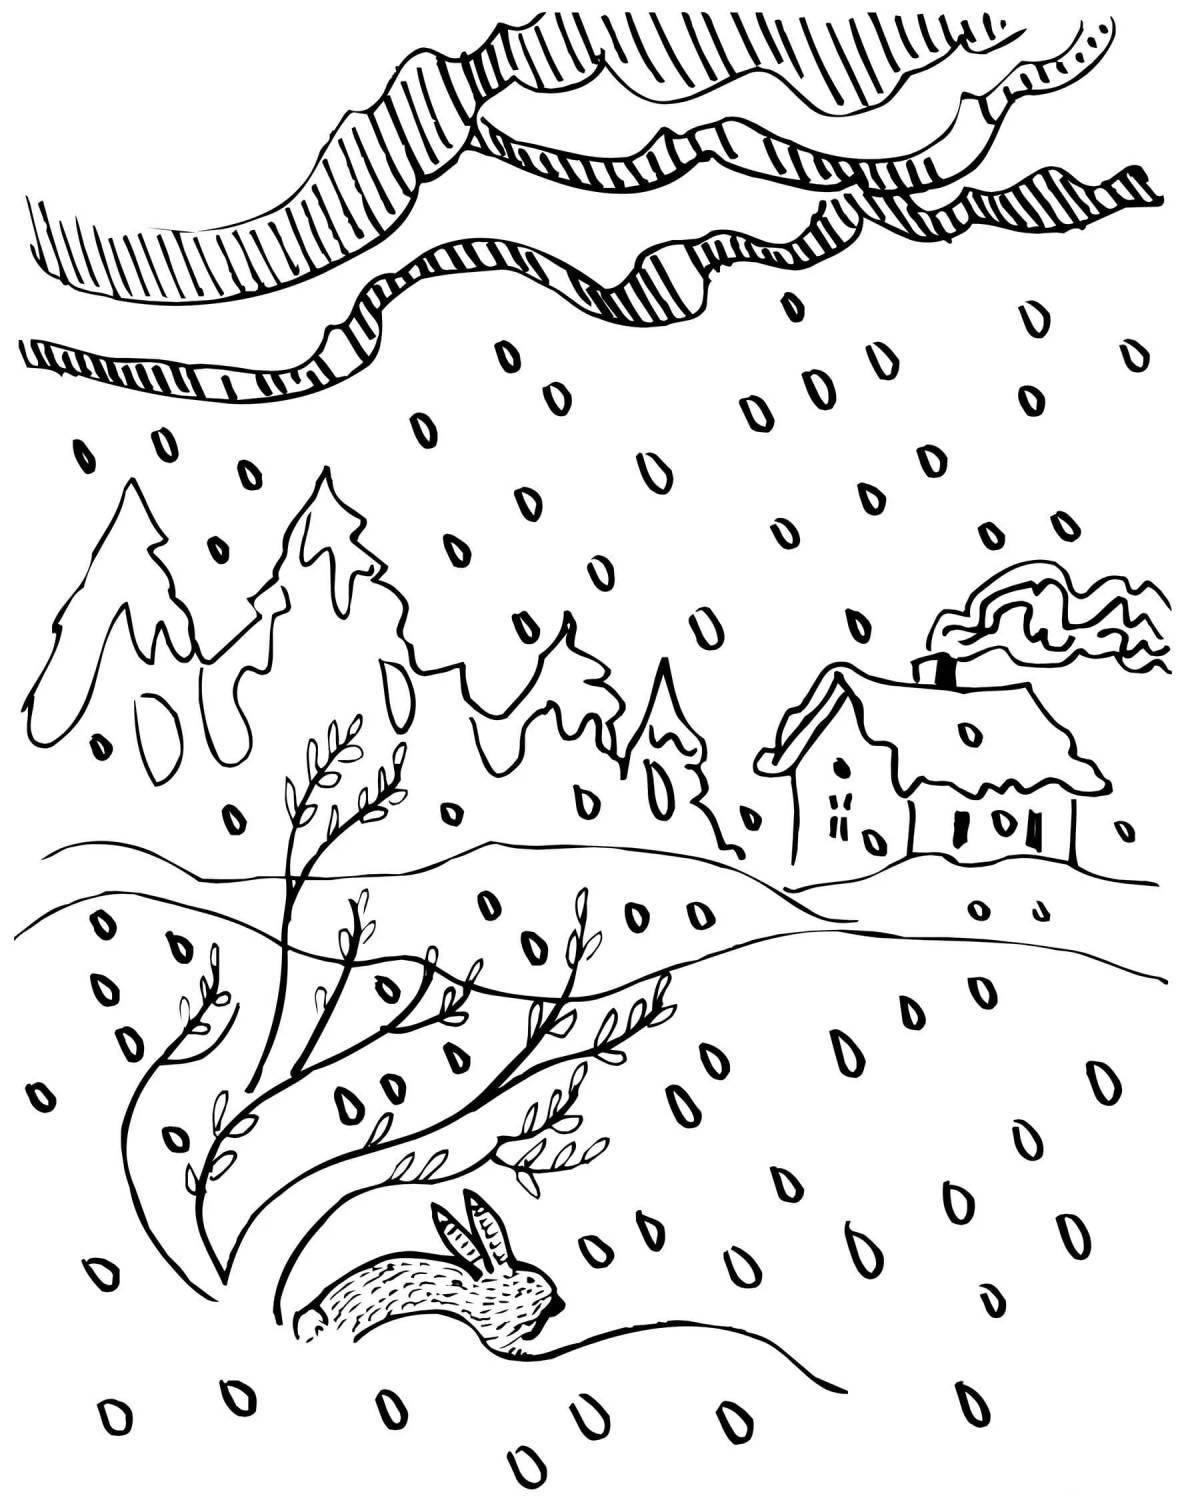 Exciting snow castle coloring book for kids